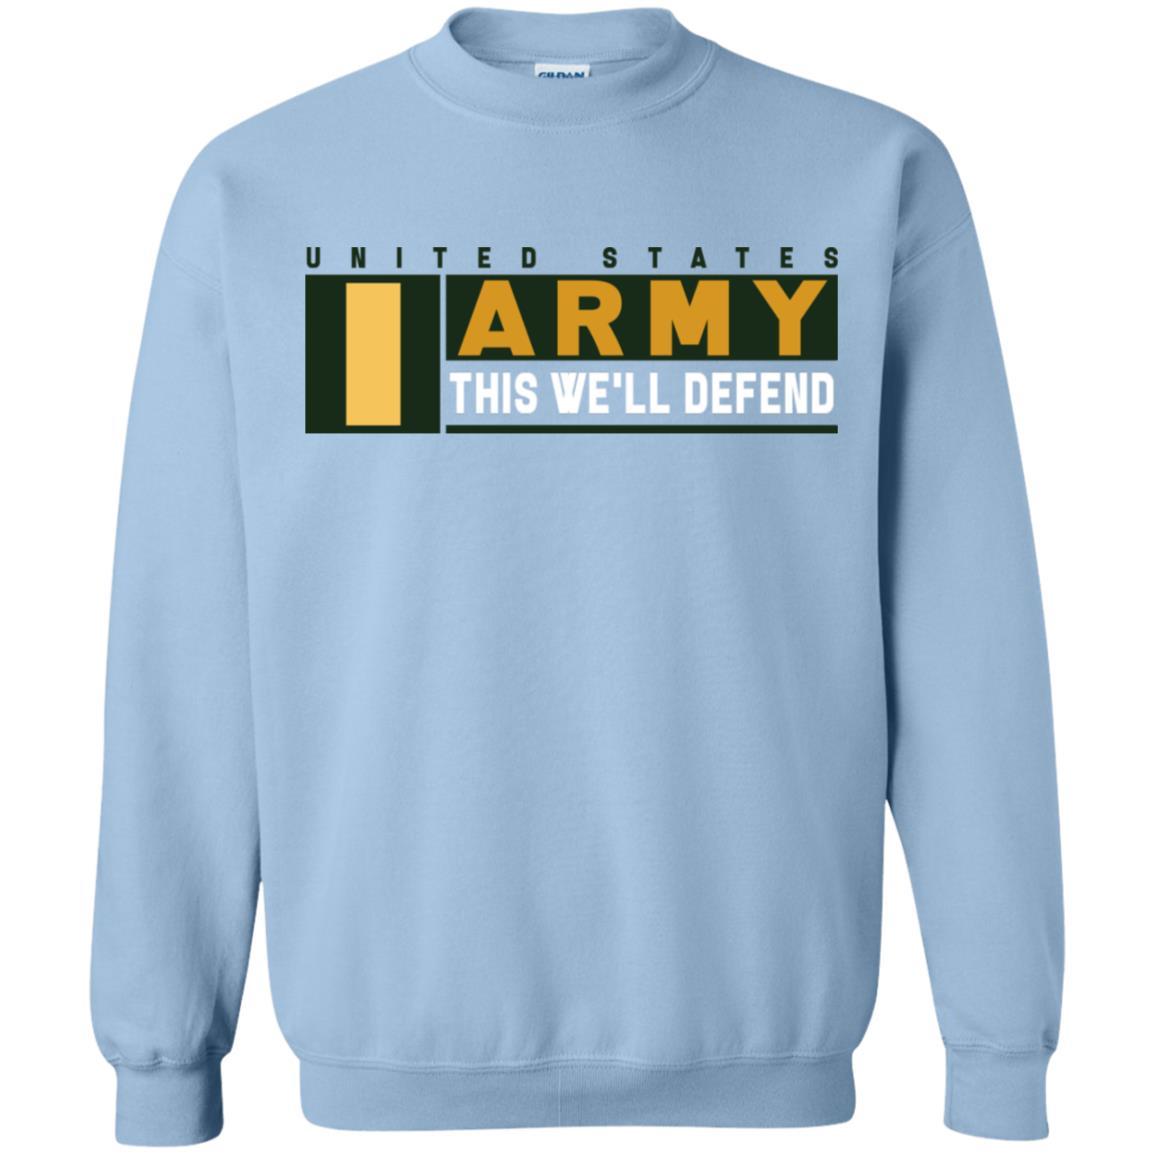 US Army O-1 This We Will Defend Long Sleeve - Pullover Hoodie-TShirt-Army-Veterans Nation